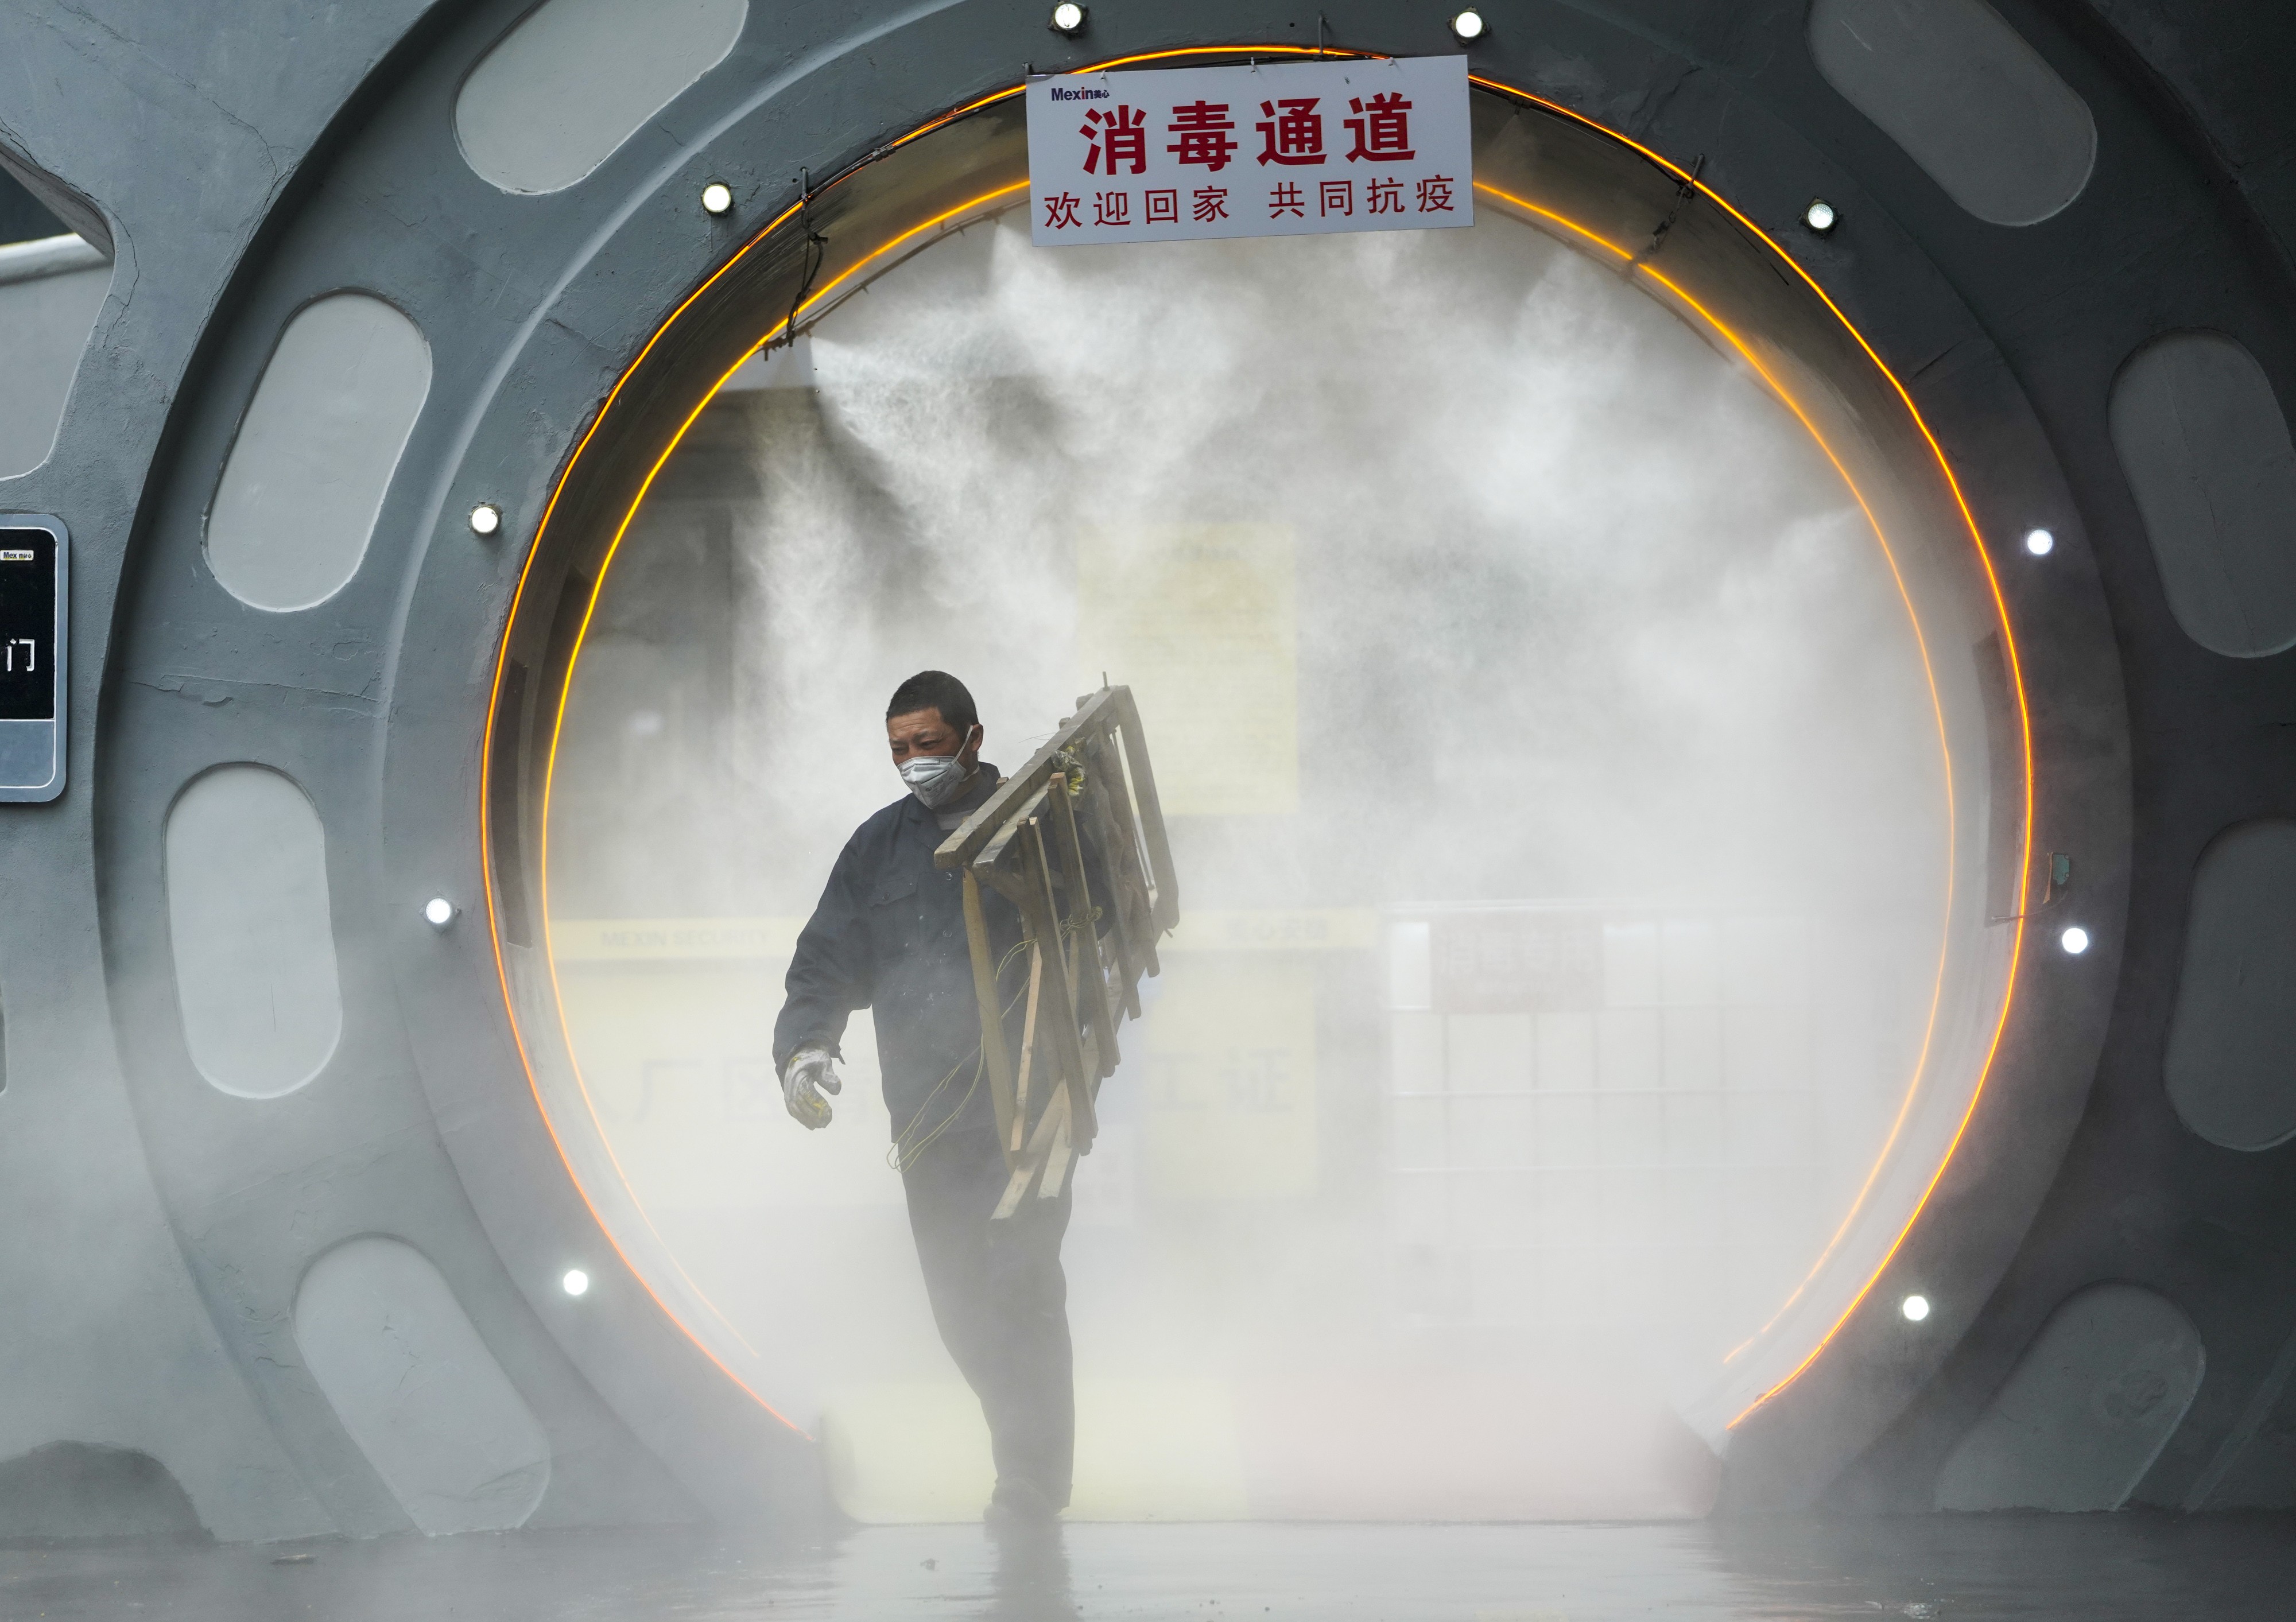 A man walks through a disinfection gate before leaving the work area of Chongqing Mexin Group in southwest China's Chongqing municipality on February 12. Photo: Xinhua